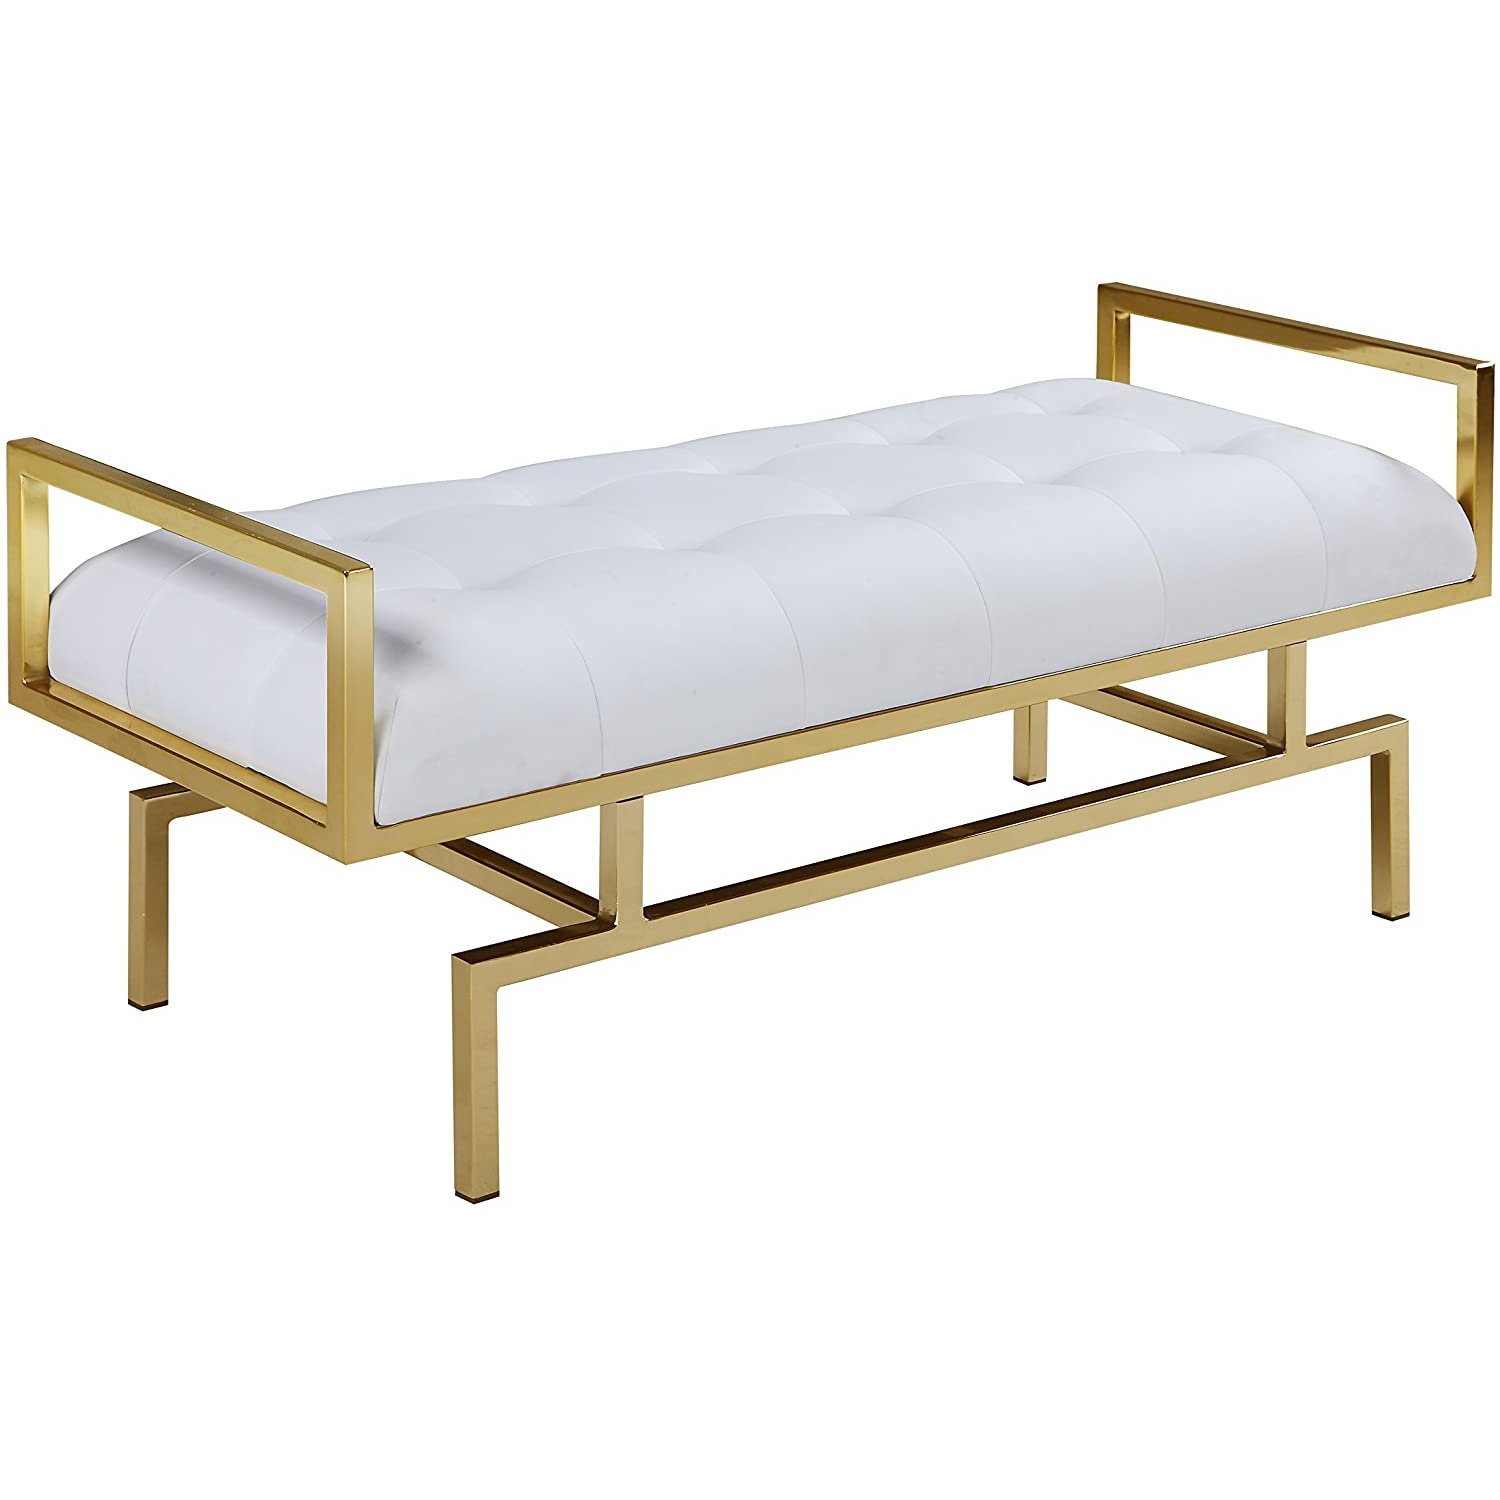 Iconic Home Bruno PU Leather Modern Contemporary Tufted Seating Goldtone Metal Leg Bench, White Featured Image